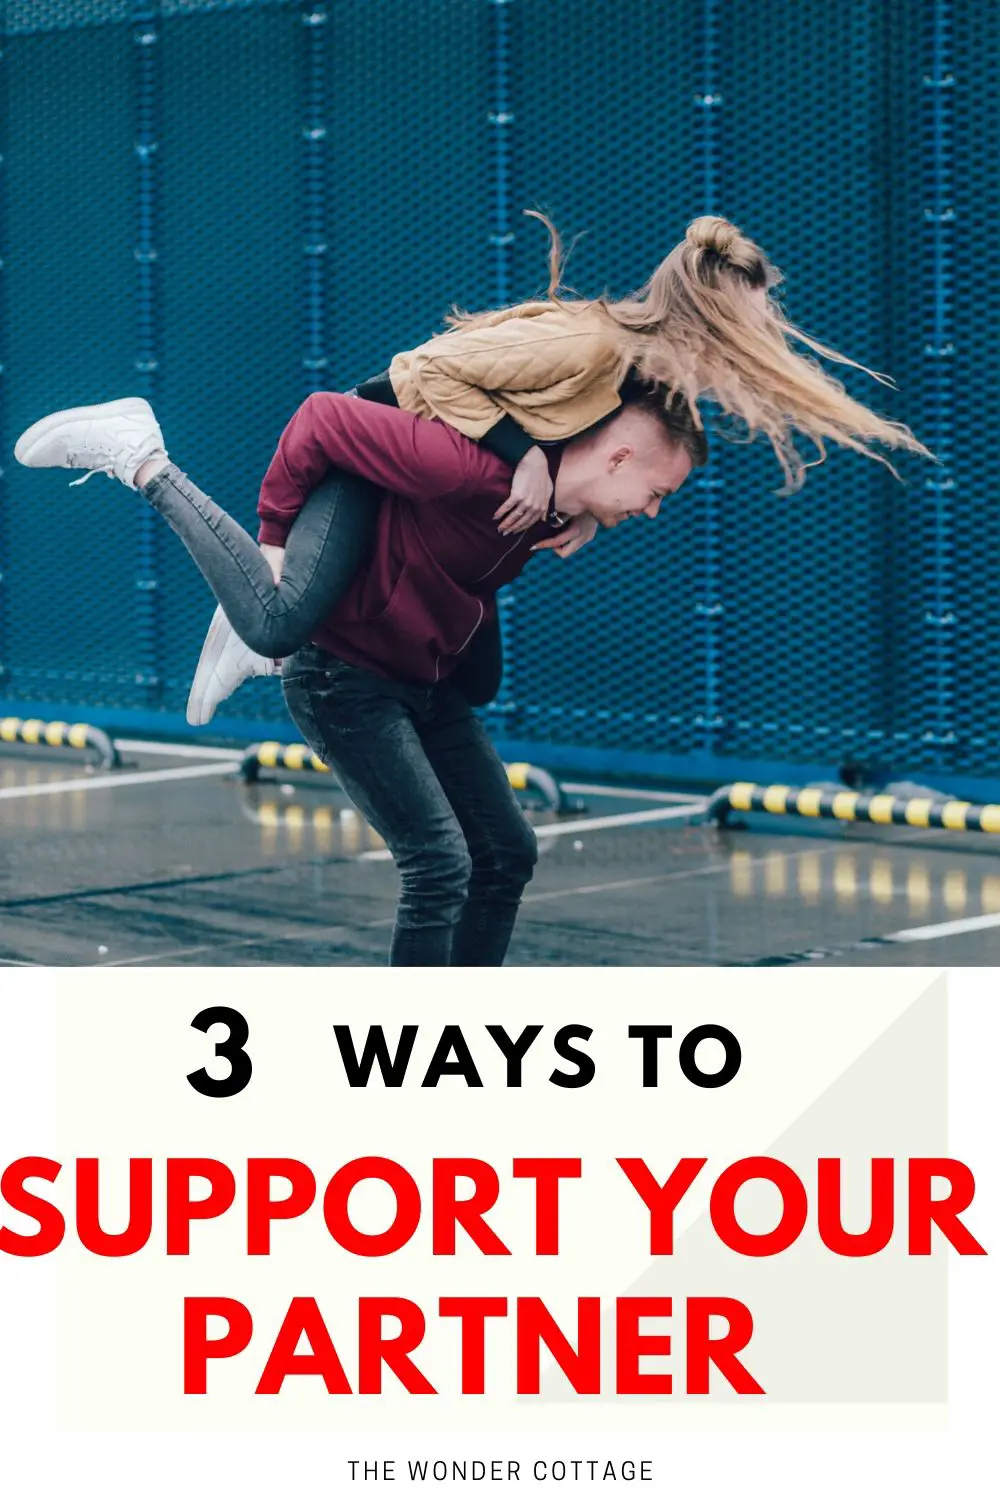 3 ways to support your partner